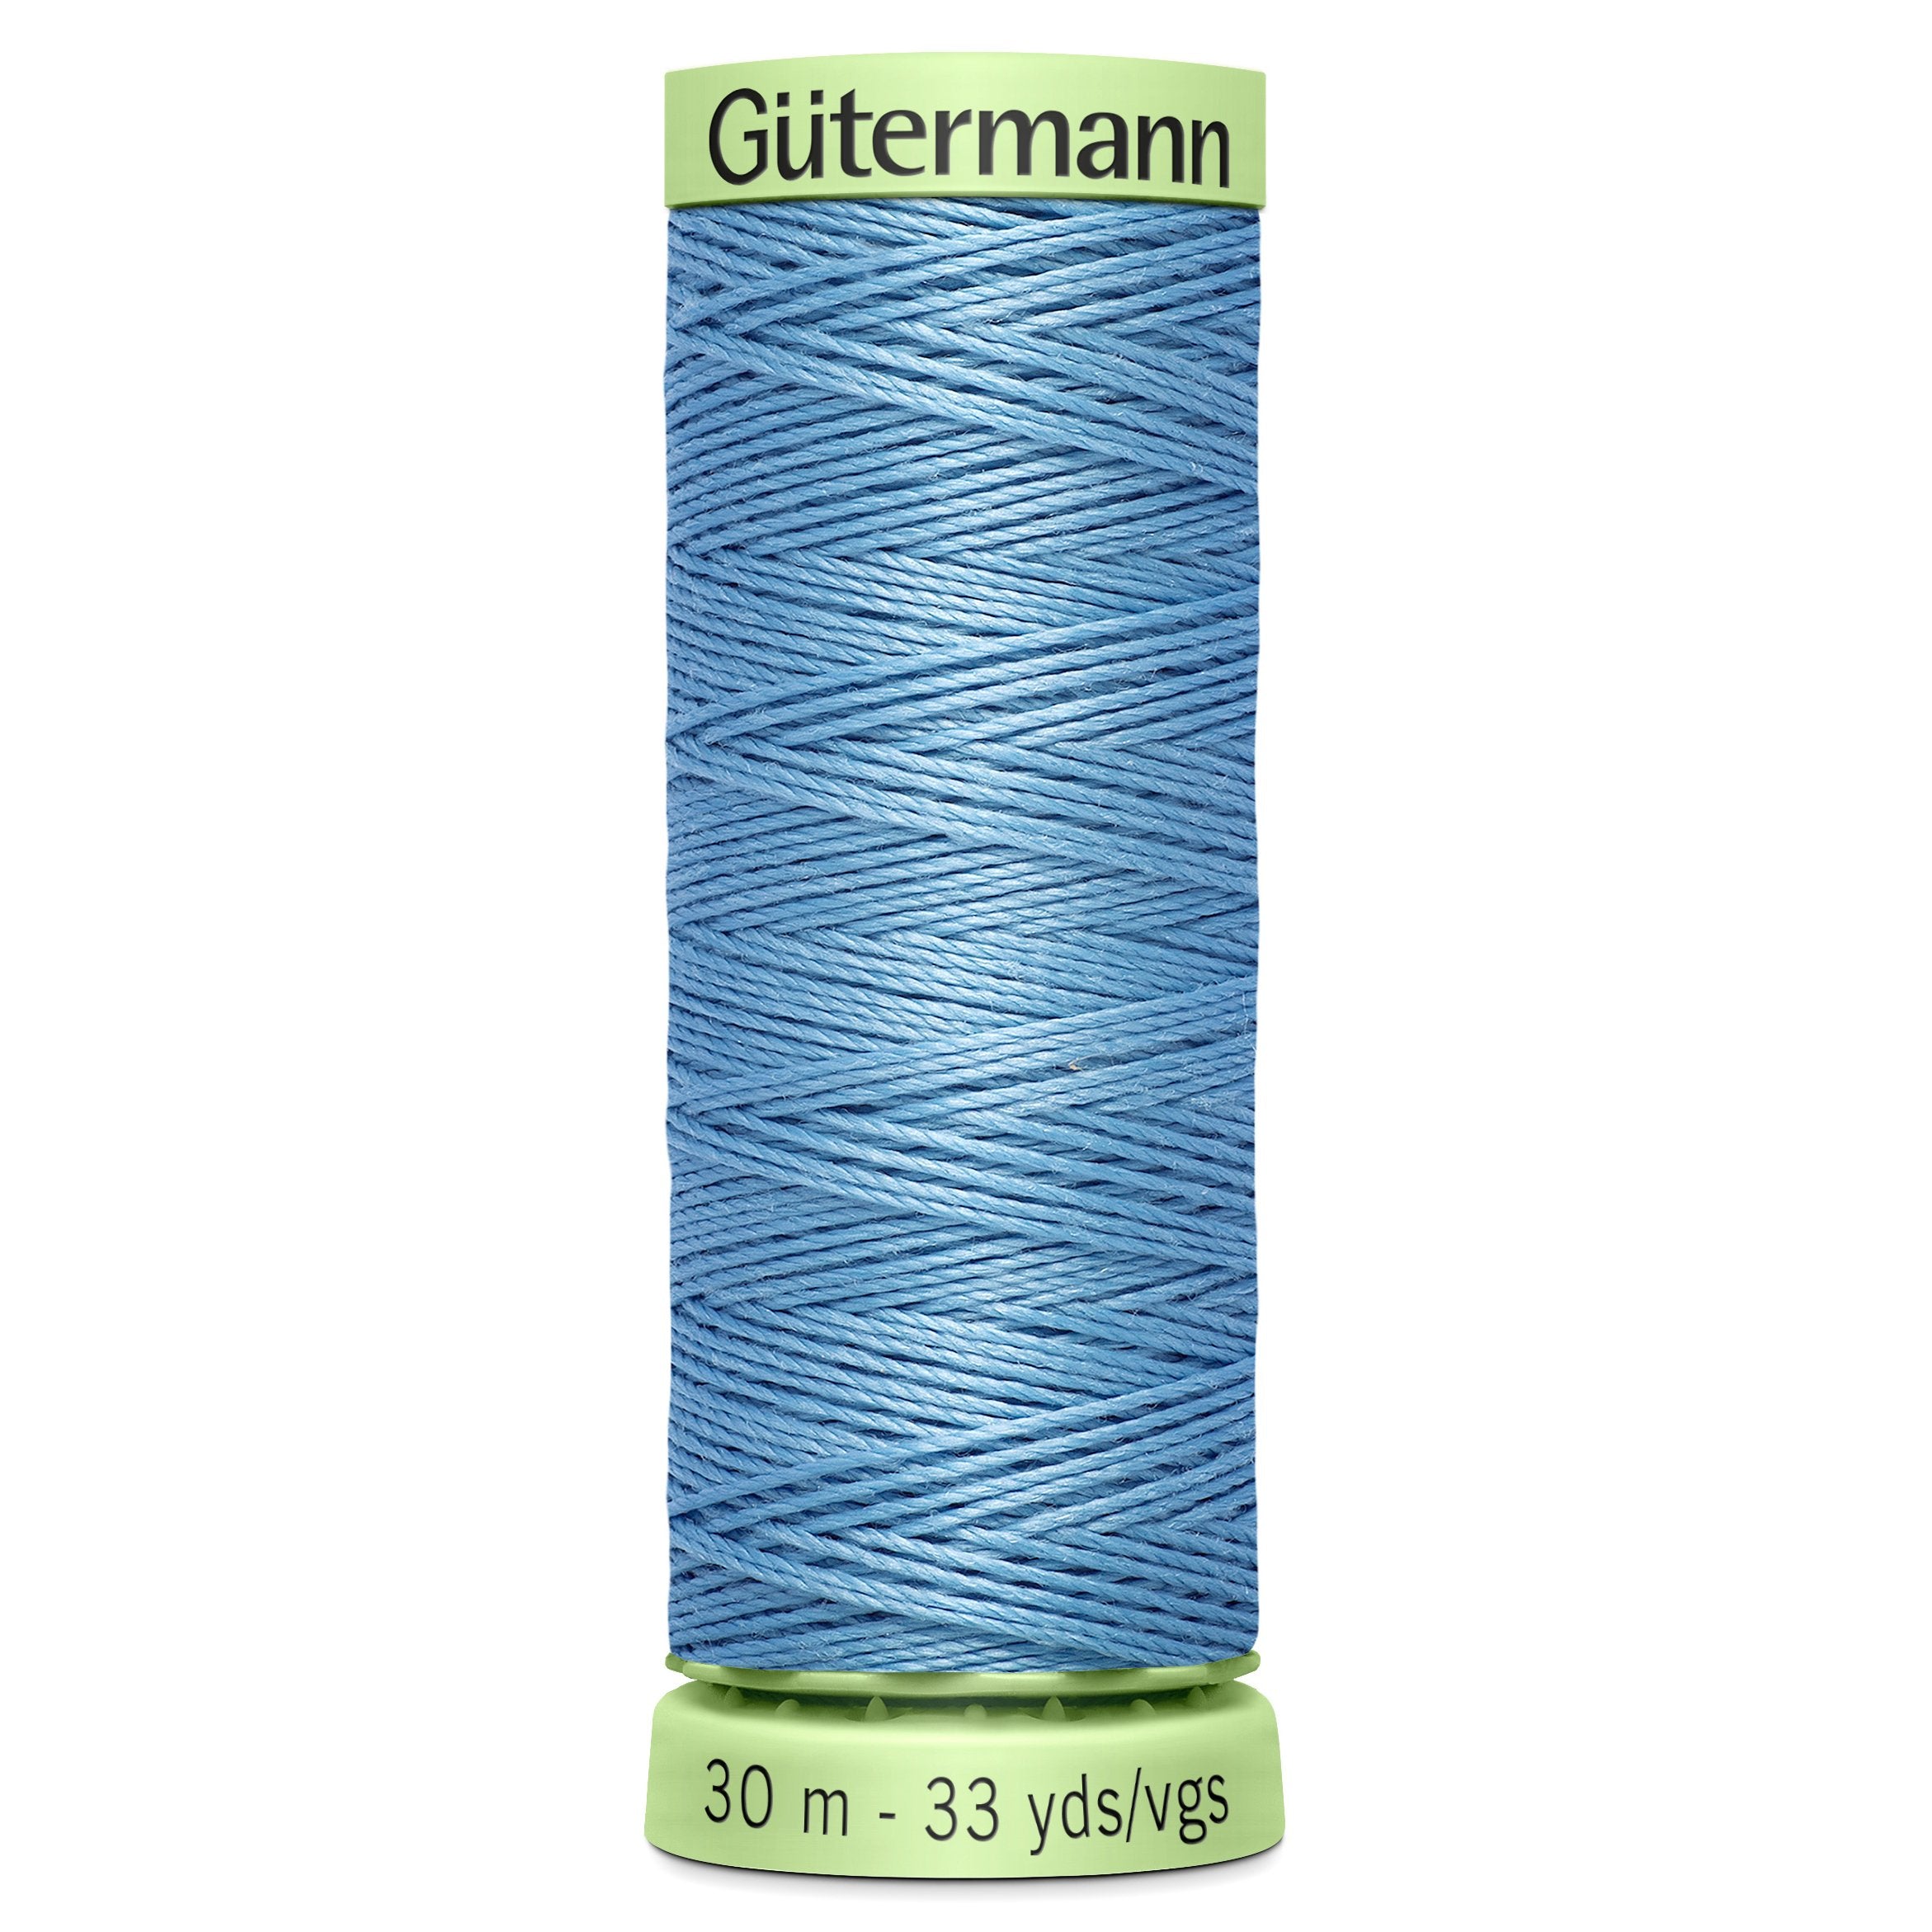 Gutermann TopStitch Thread 143 | Sky from Jaycotts Sewing Supplies